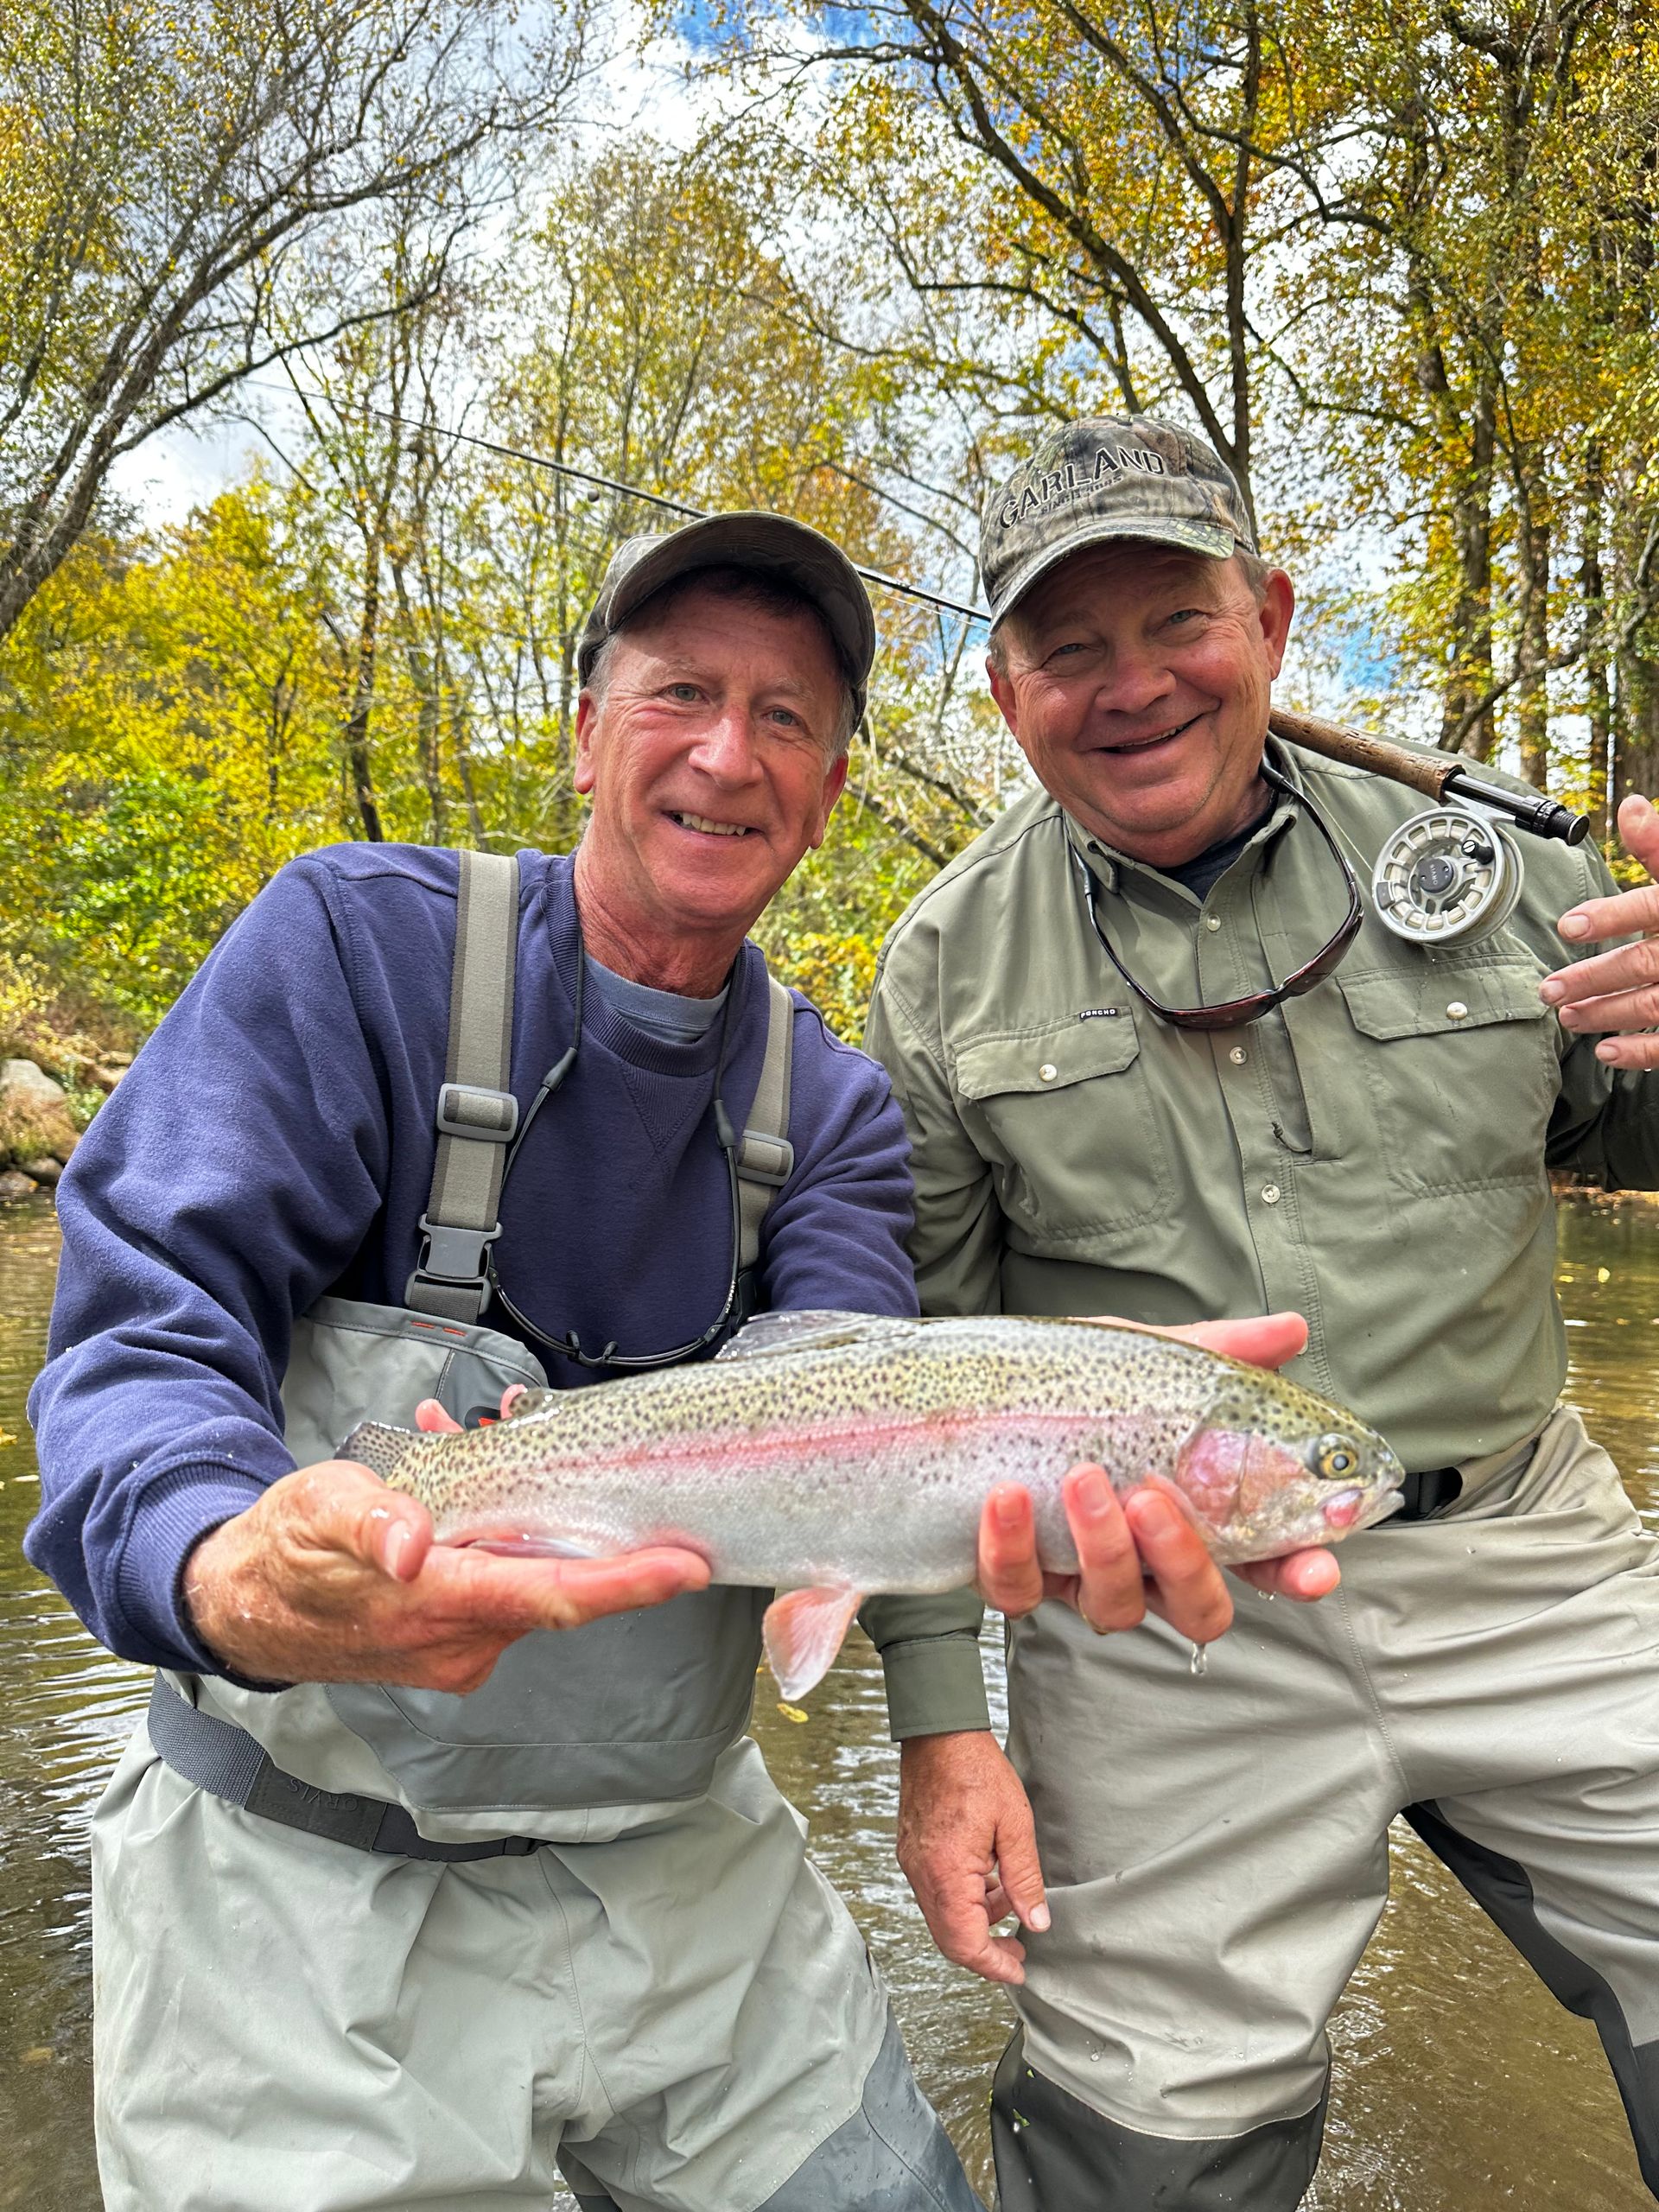 Group Fly Fishing Wade All-Inclusive Adventure with Gears, Guides and More image 2